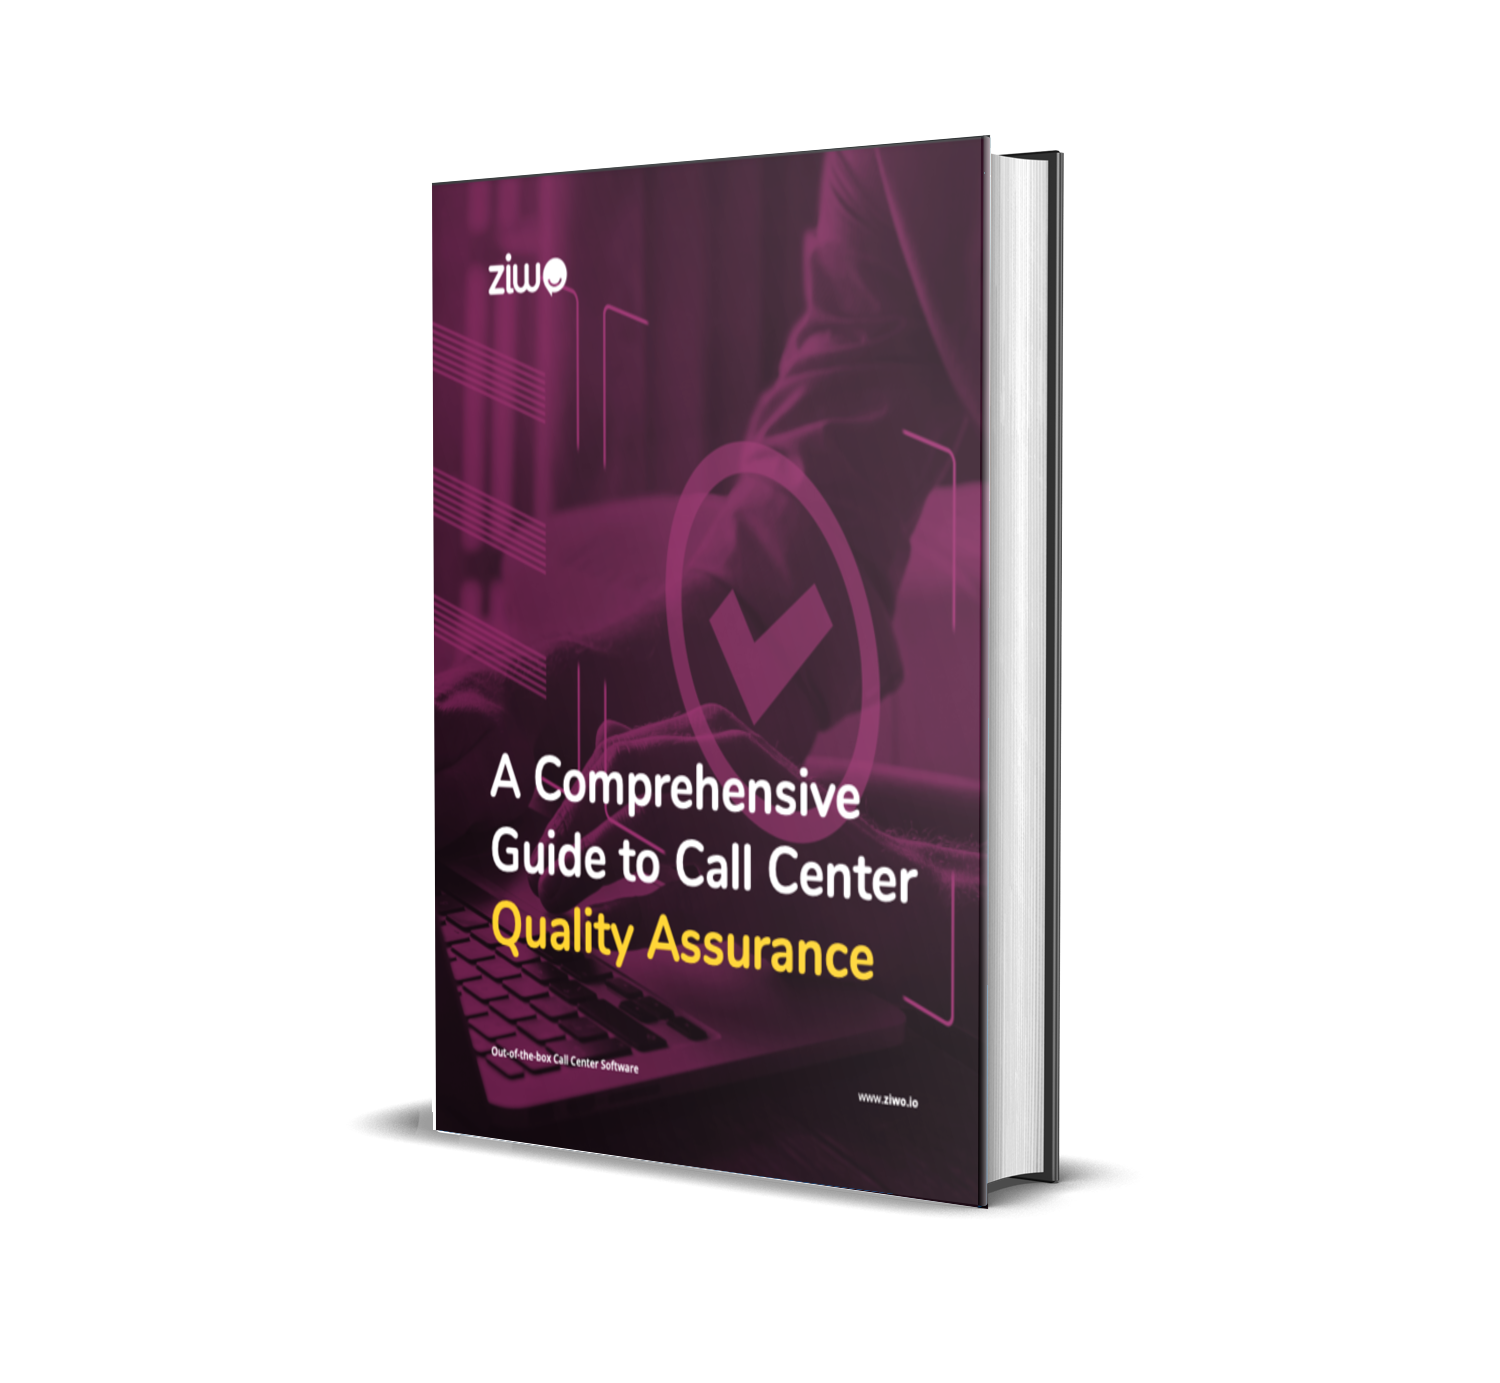 A book with a title "A Comprehensive Guide to Call Center Qulity Assurance"